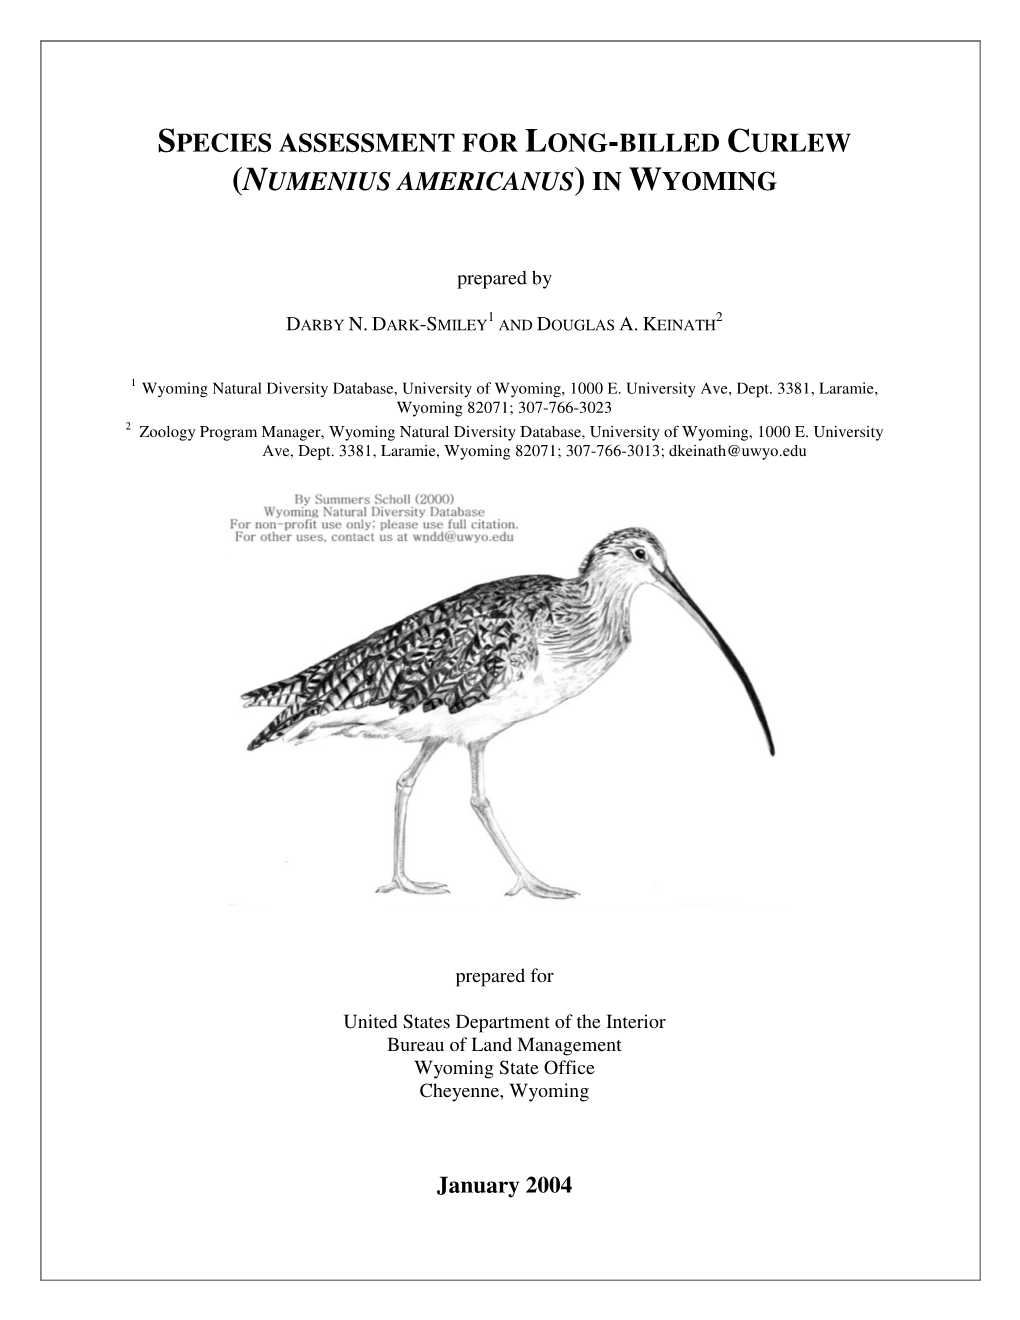 Species Assessment for Long-Billed Curlew